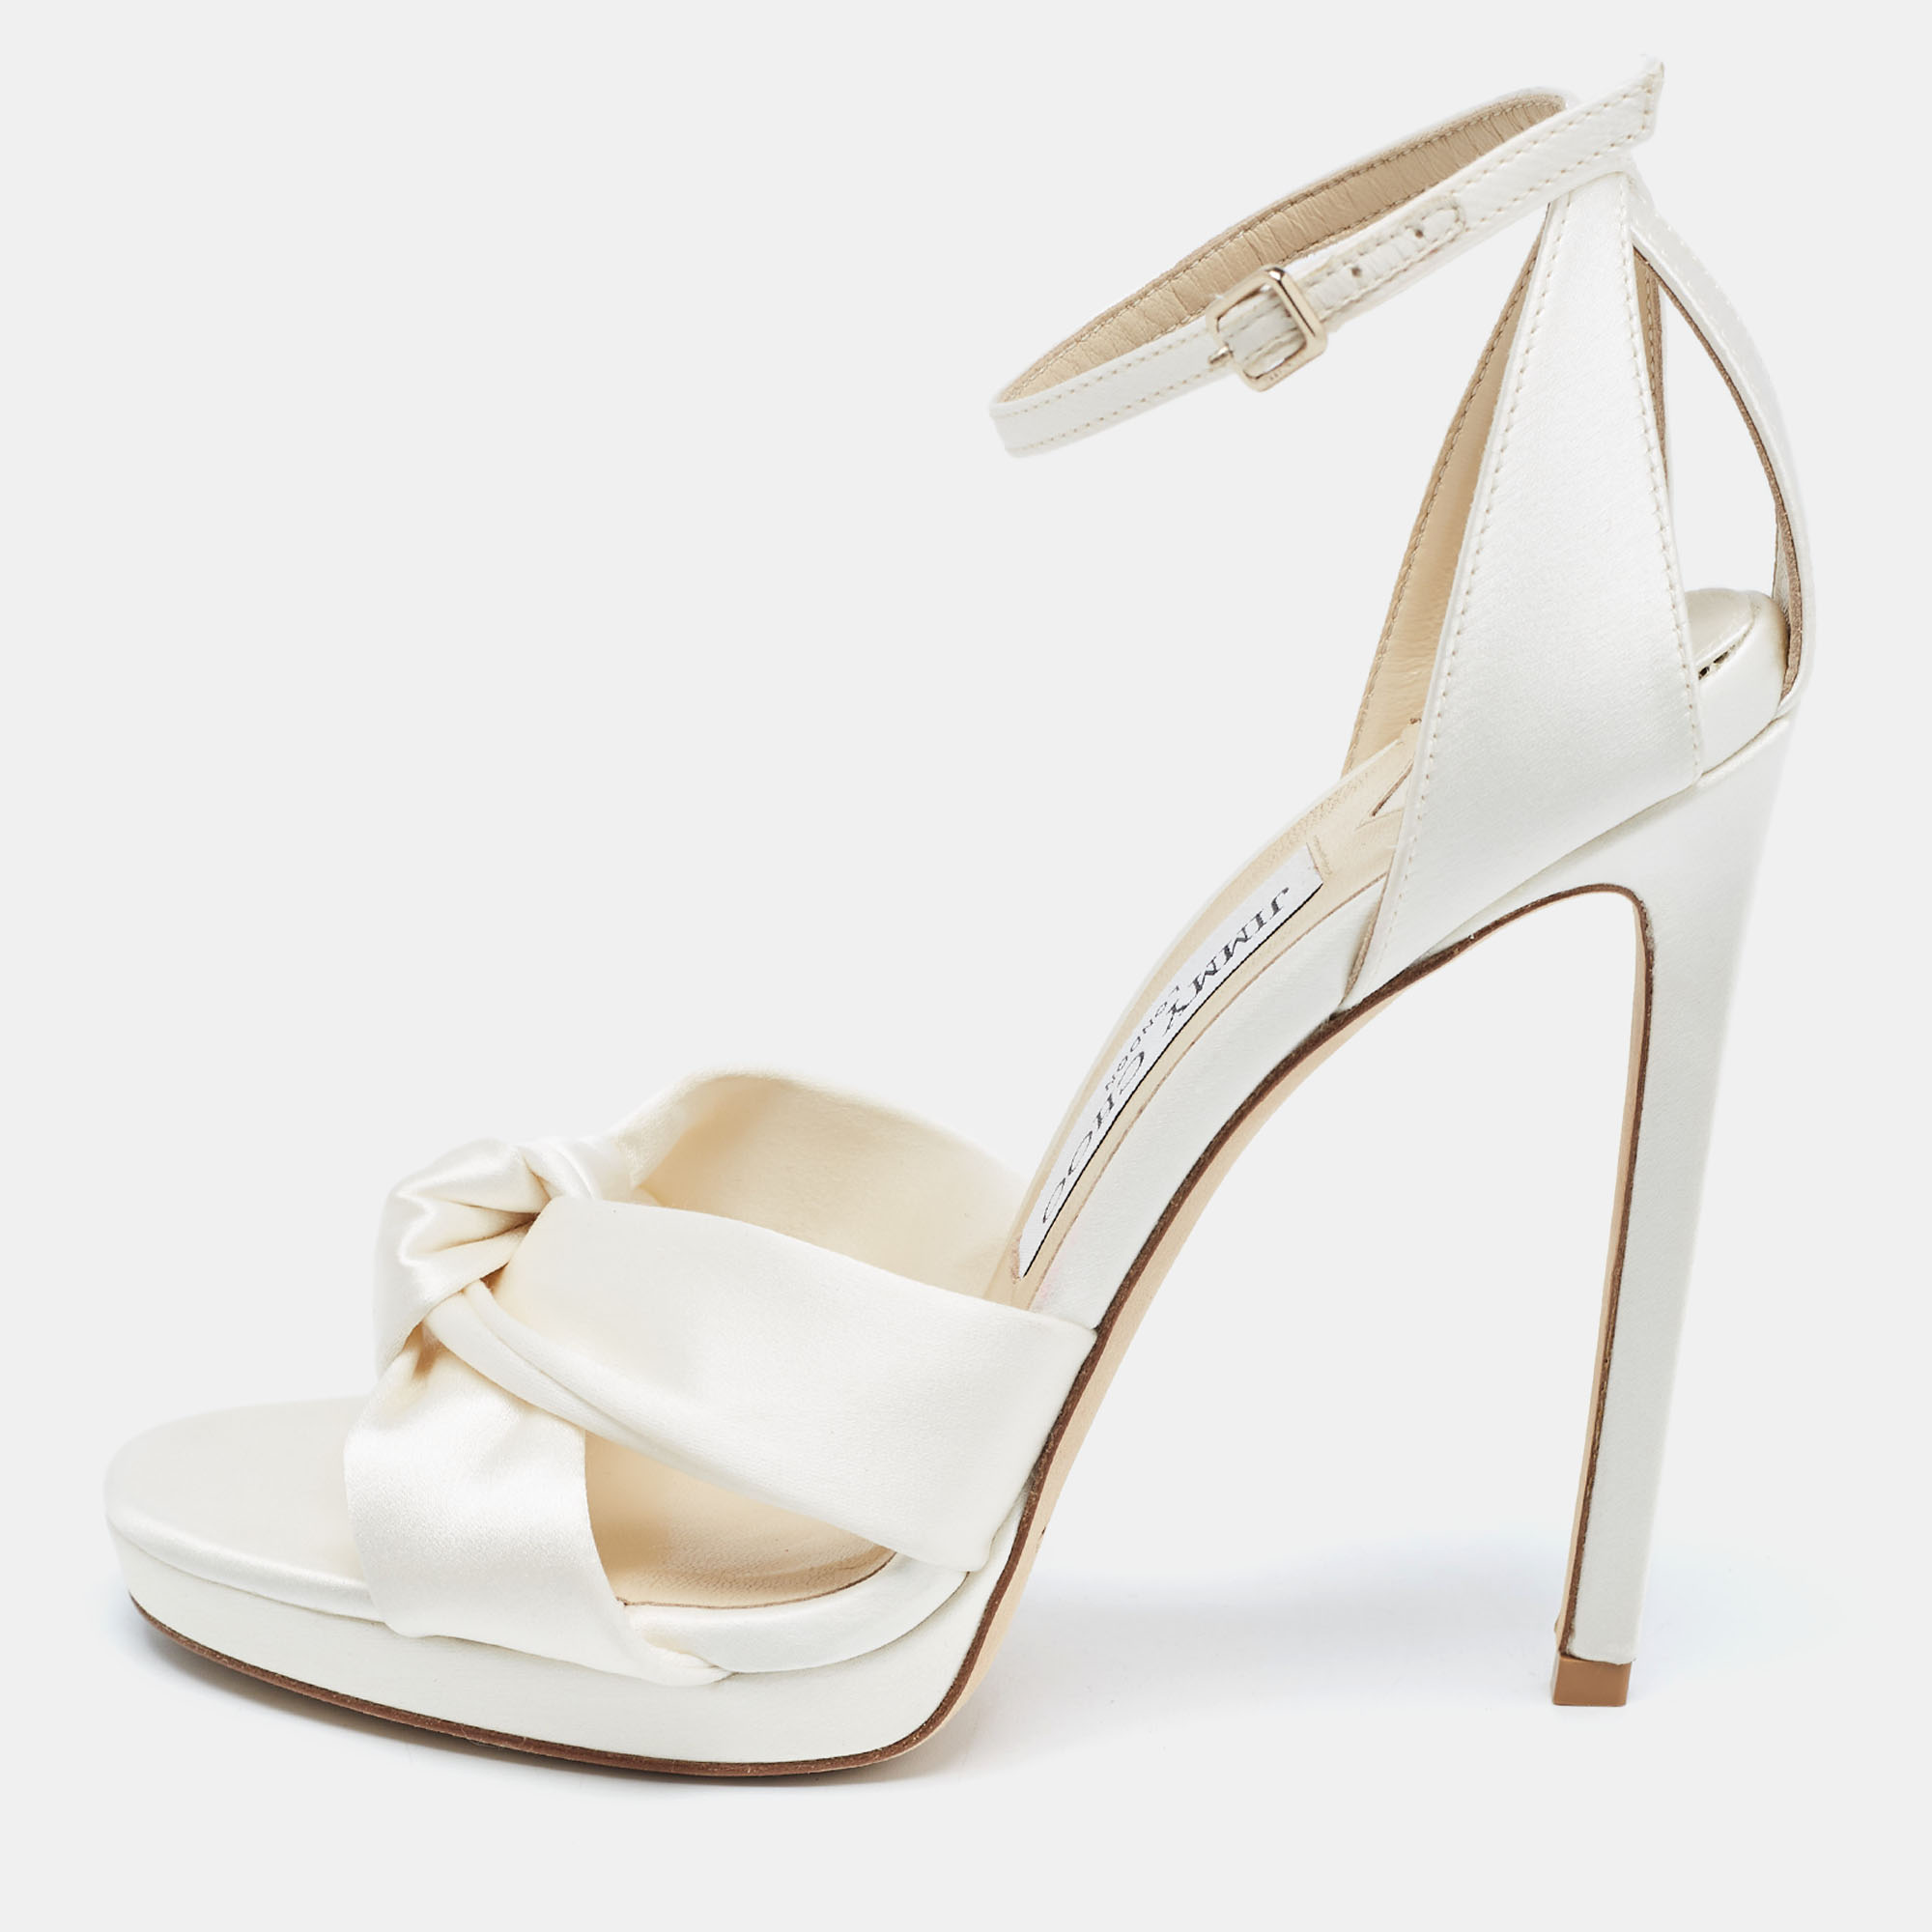 Jimmy Choo Ivory Satin Rosie Ankle Strap Sandals Size 37